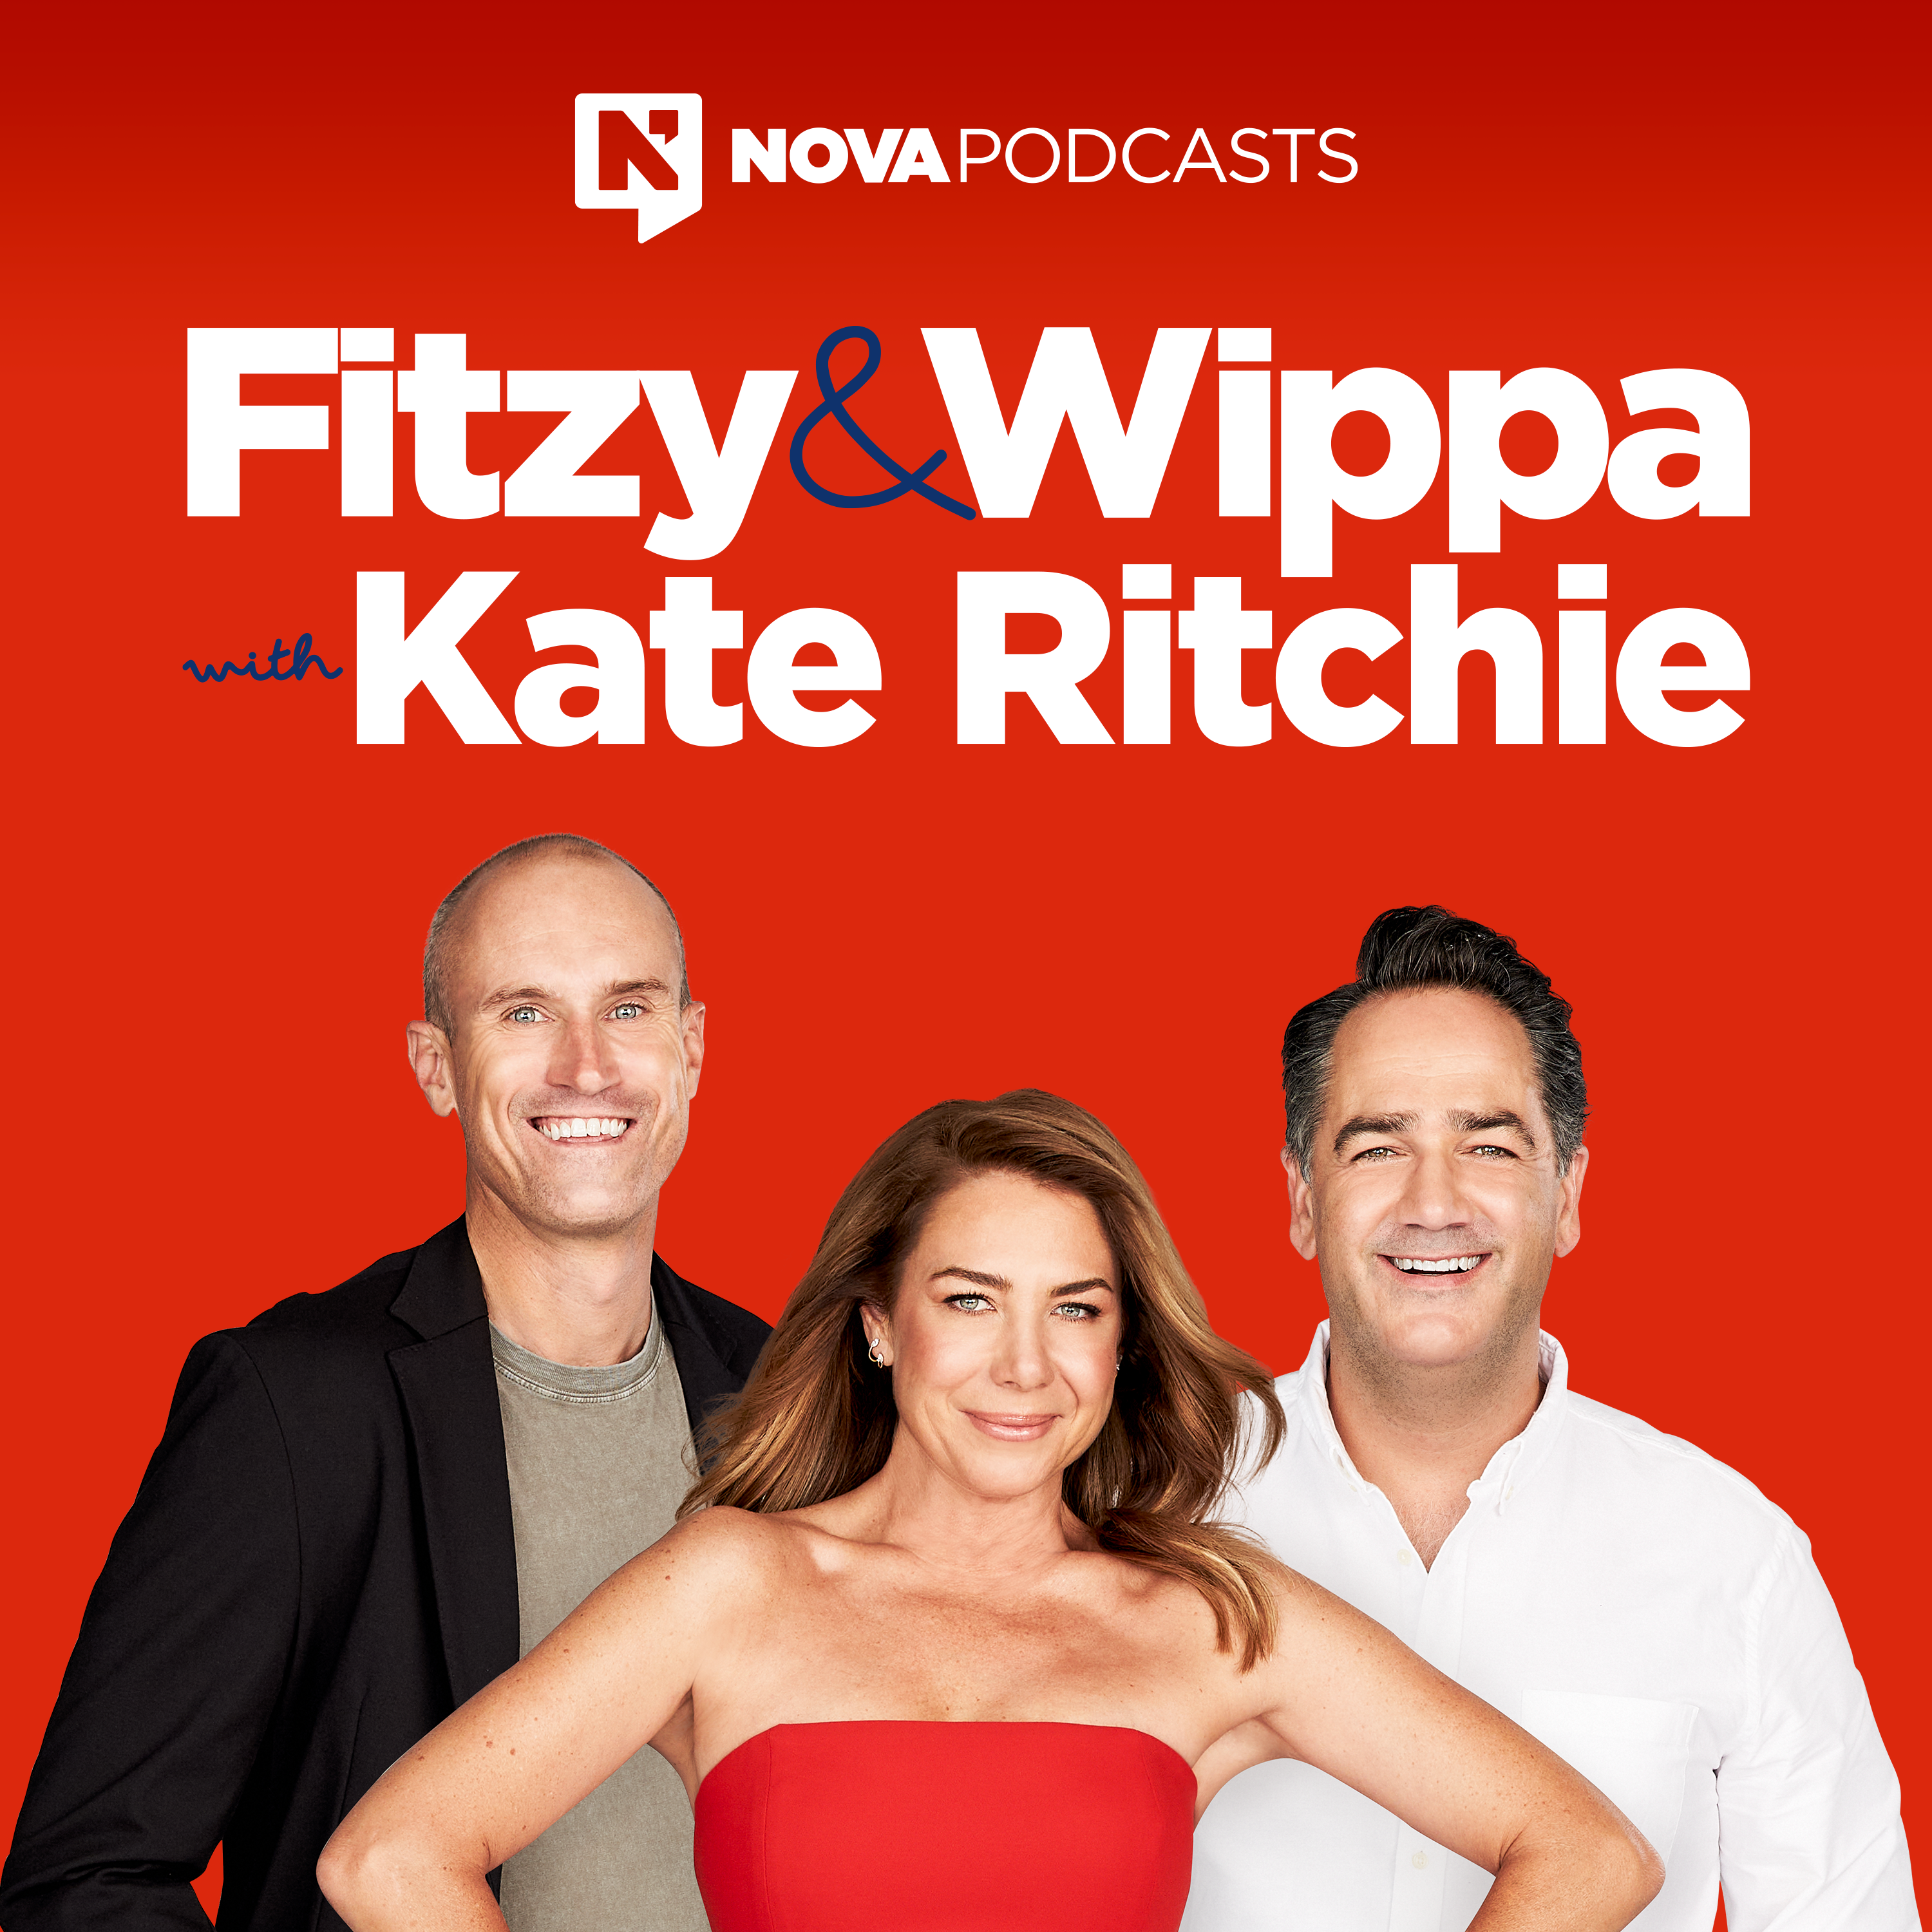 BEST BITS: You’ll Never Guess What Wippa’s Son Wants To Name Their Future Dog